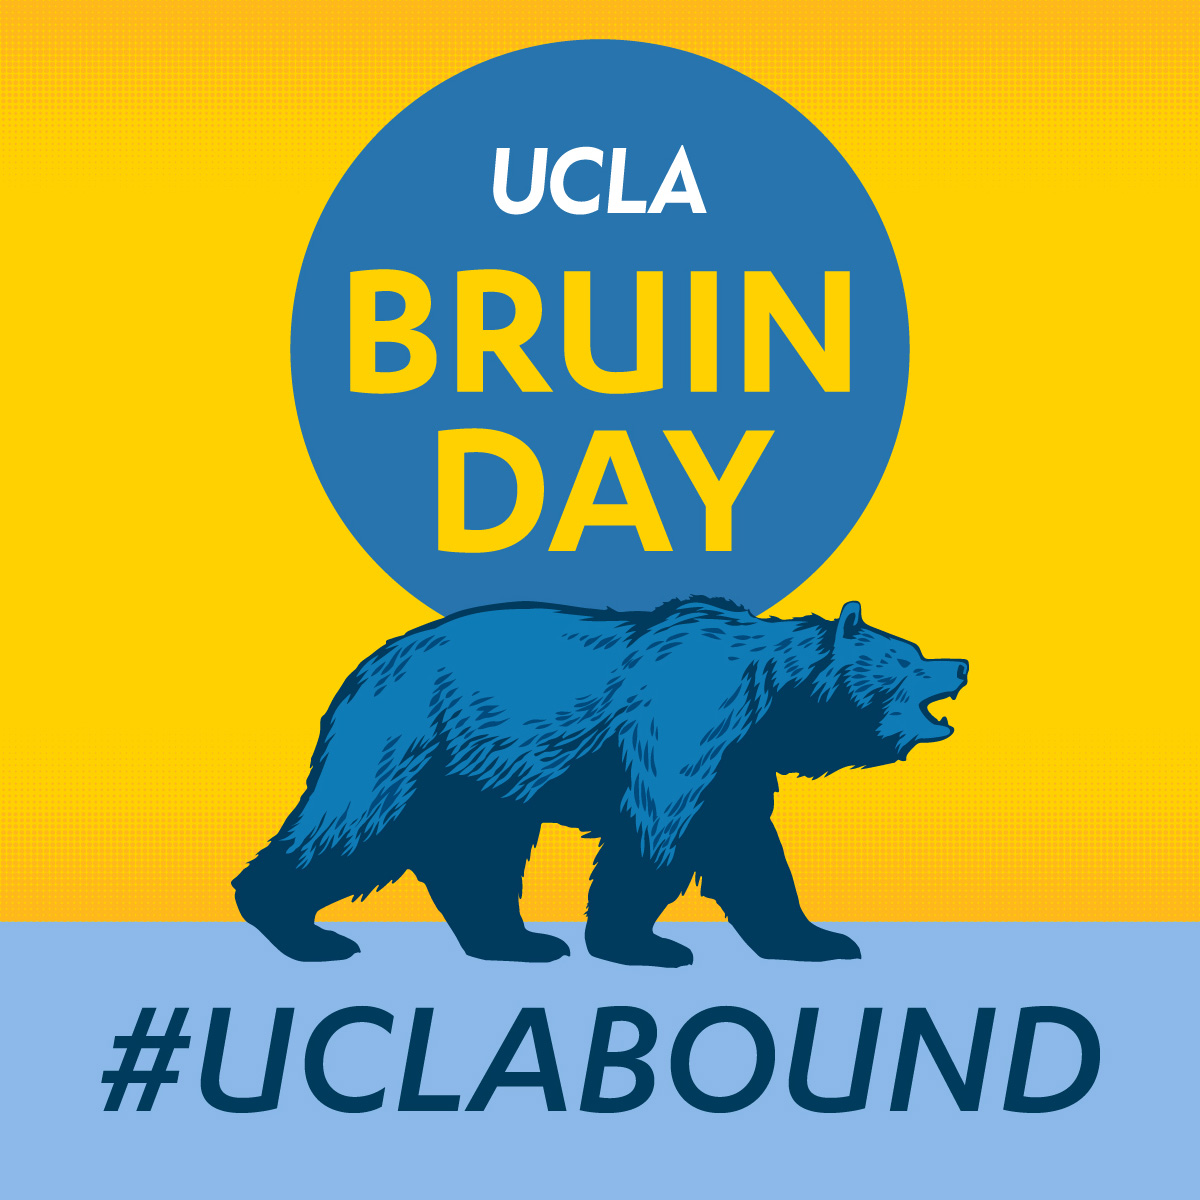 Join us during Bruin Day this Saturday, April 13 to learn how the Library can support you during your time at @UCLA. Ask us about academic resources, events, the best study spots, stressbusters and more. We can’t wait to chat! More info: bruinday.ucla.edu #UCLABOUND